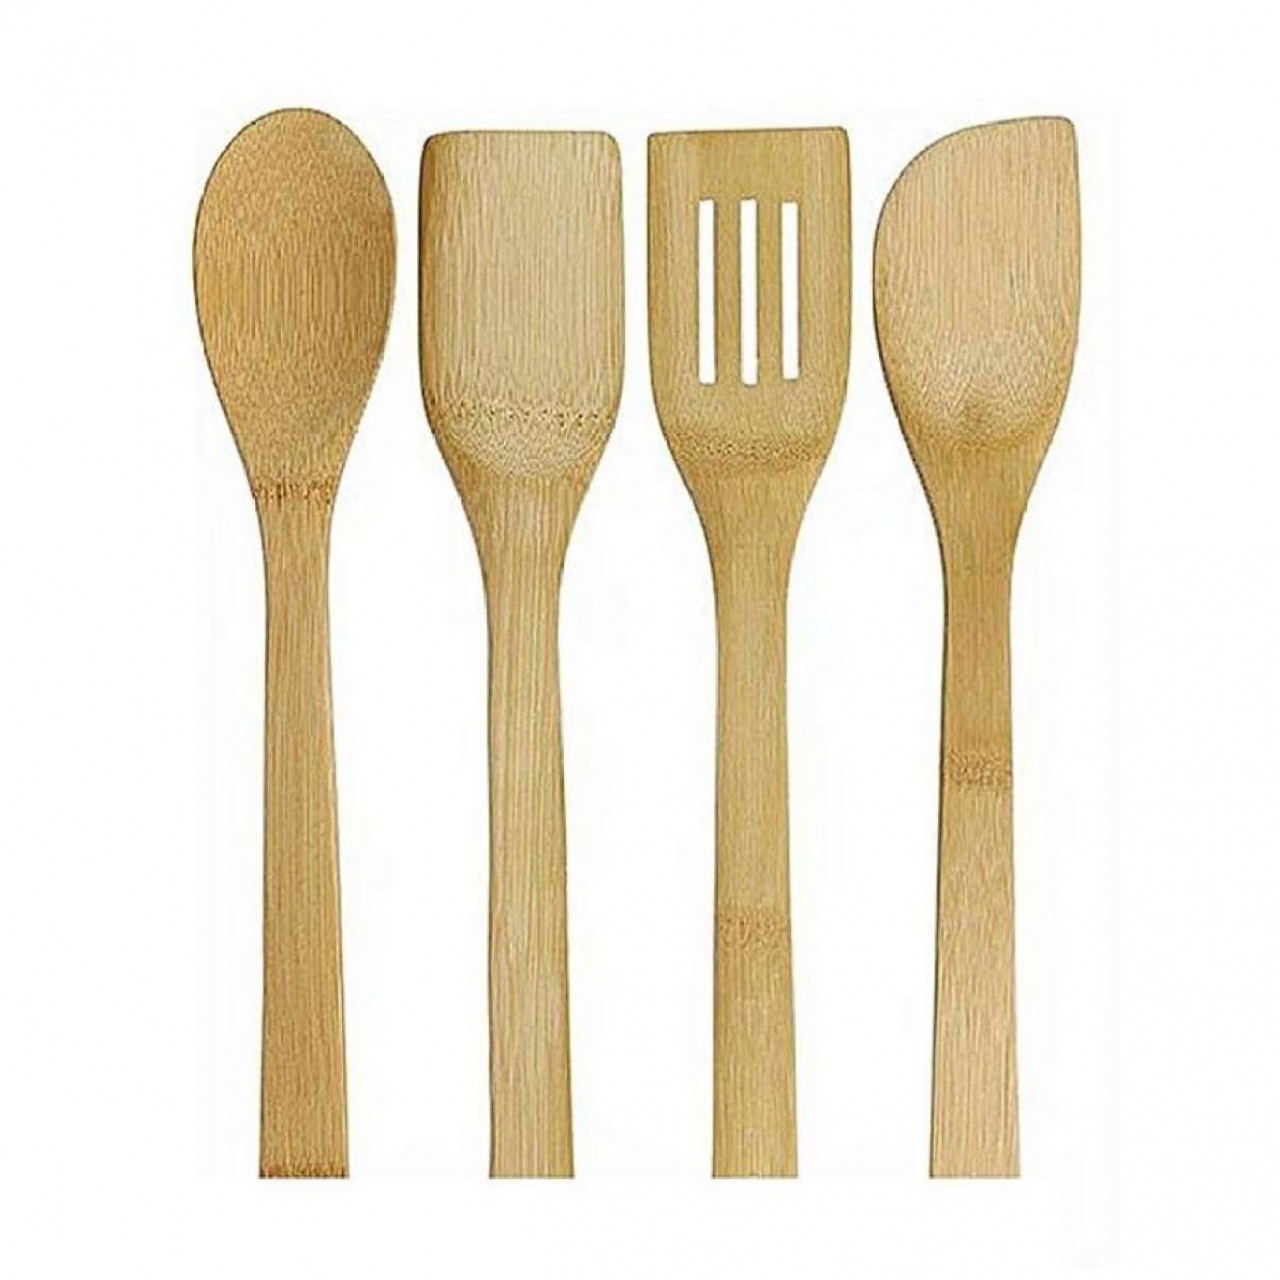 Wooden Spoon Set - Pack Of 4 - Light Brown